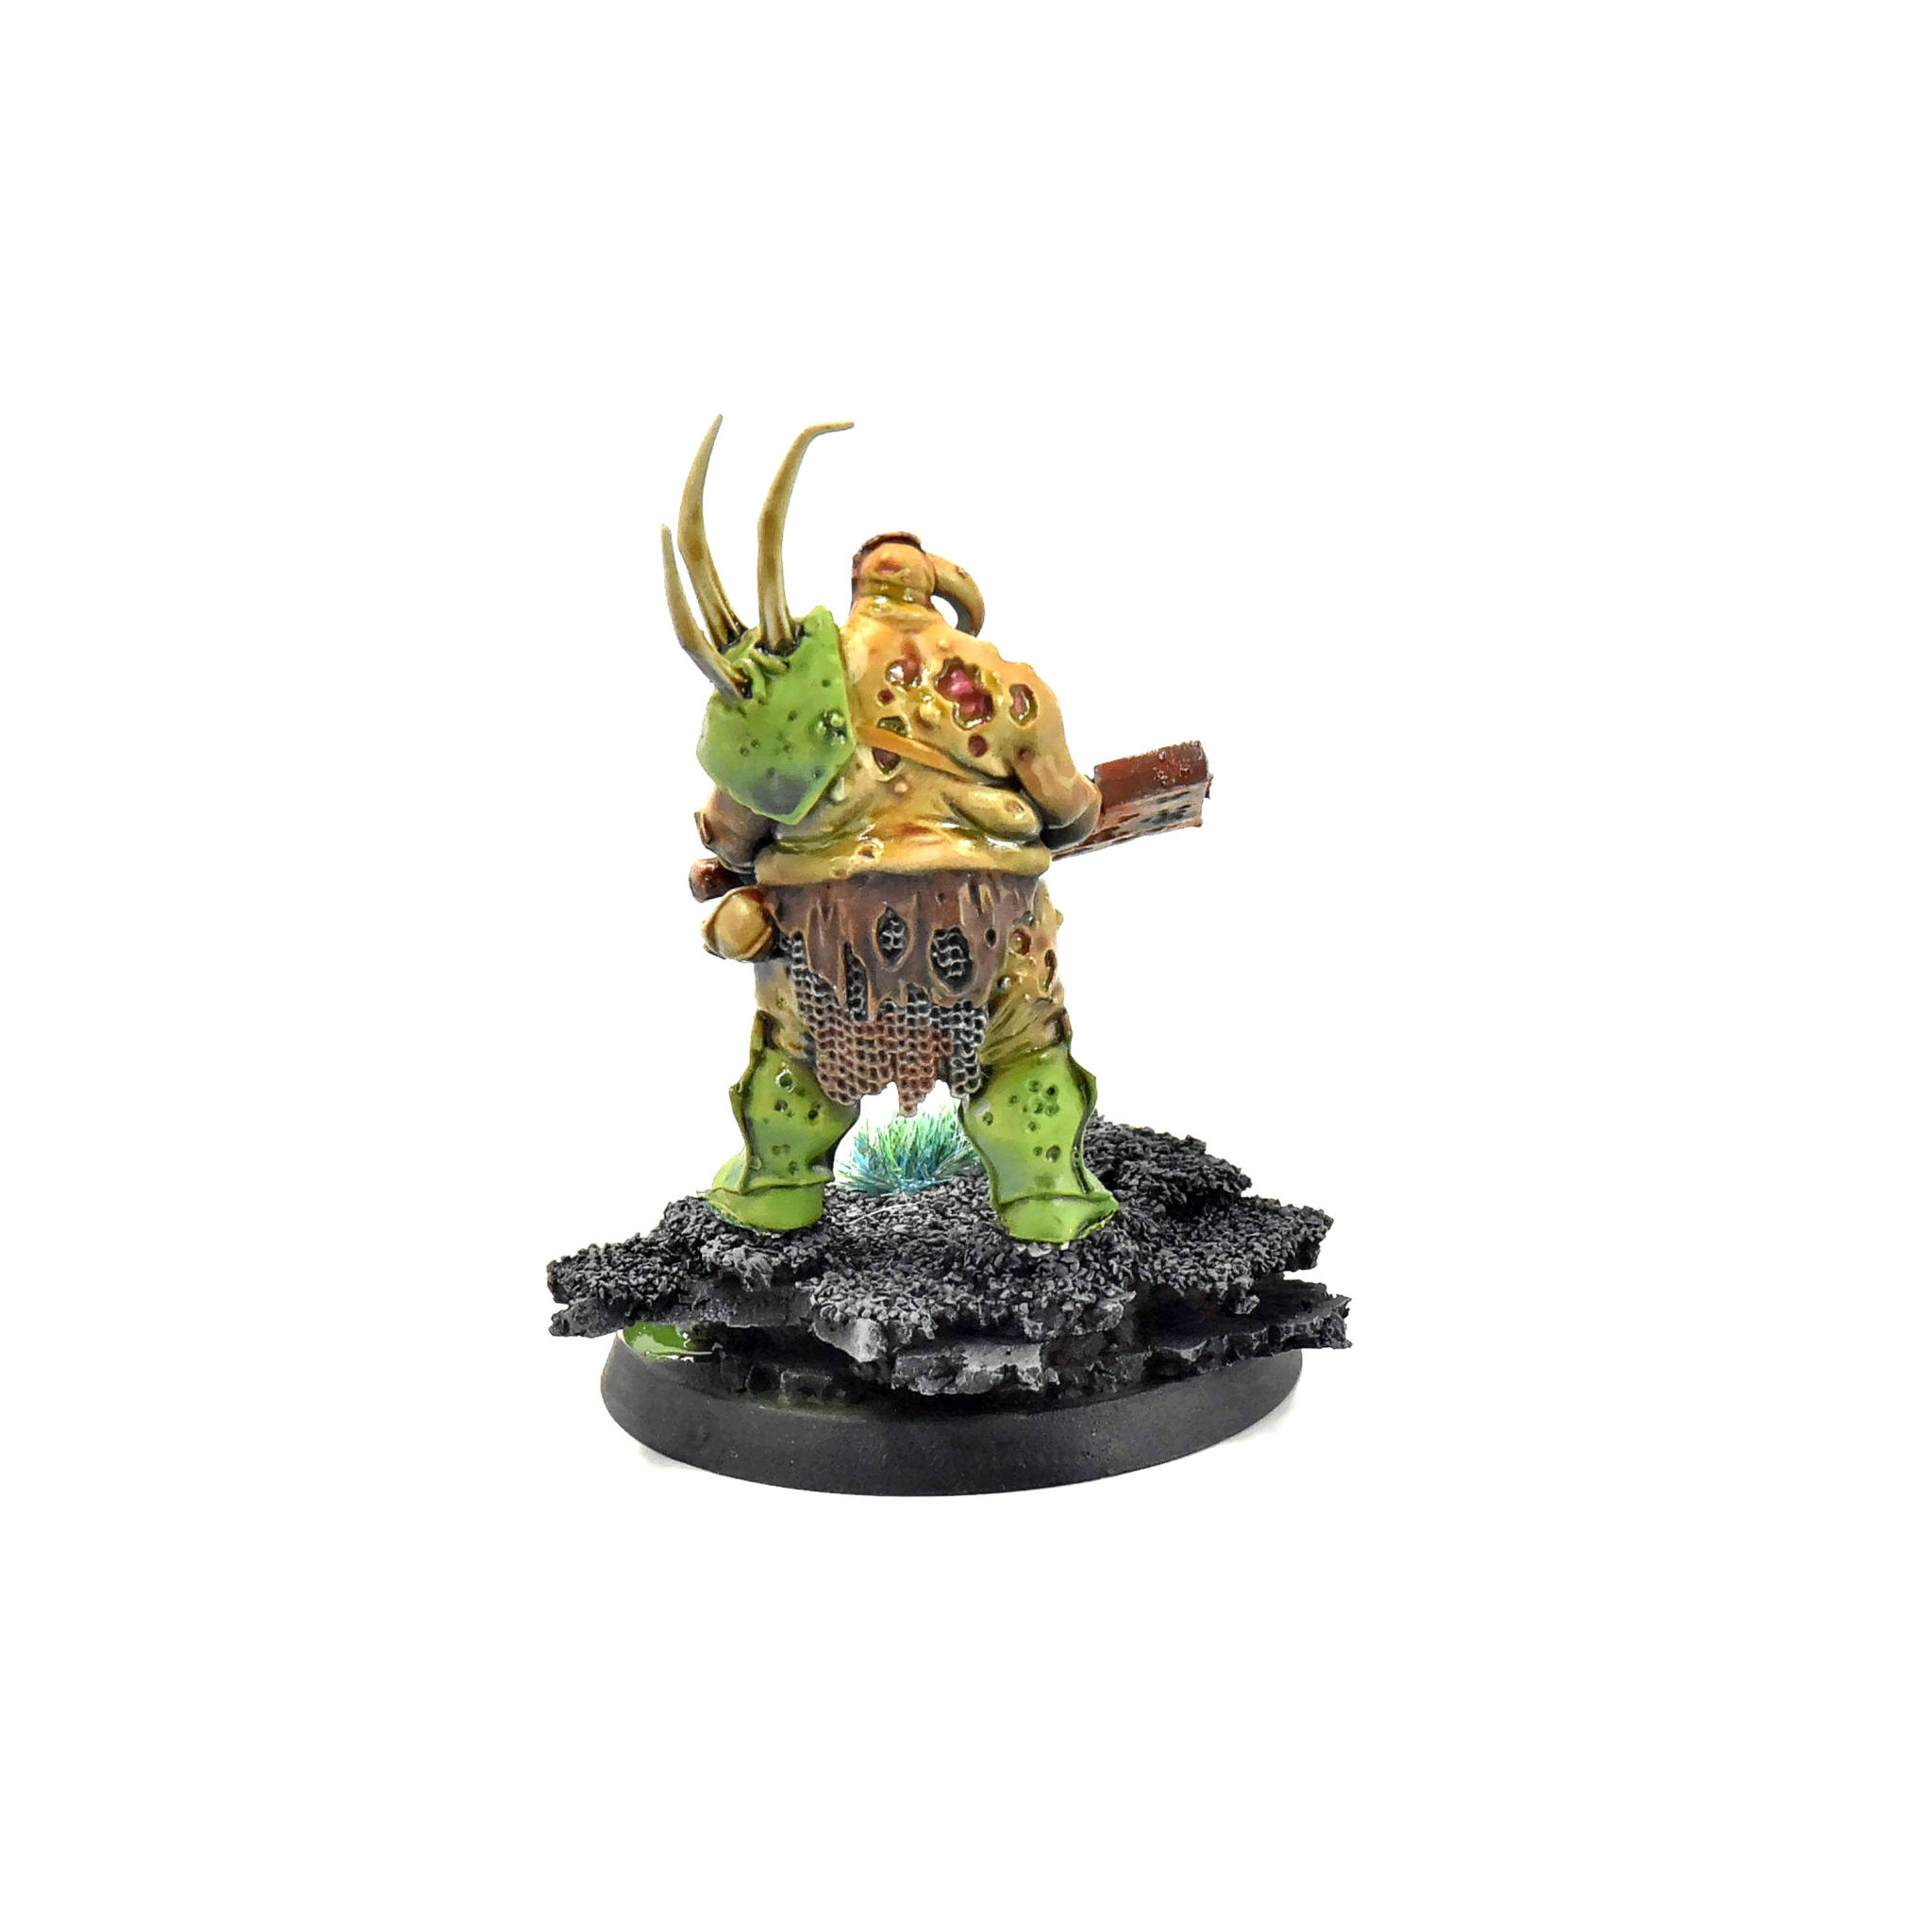 NURGLE Lord of Plagues #1 PRO PAINTED Warhammer 40k